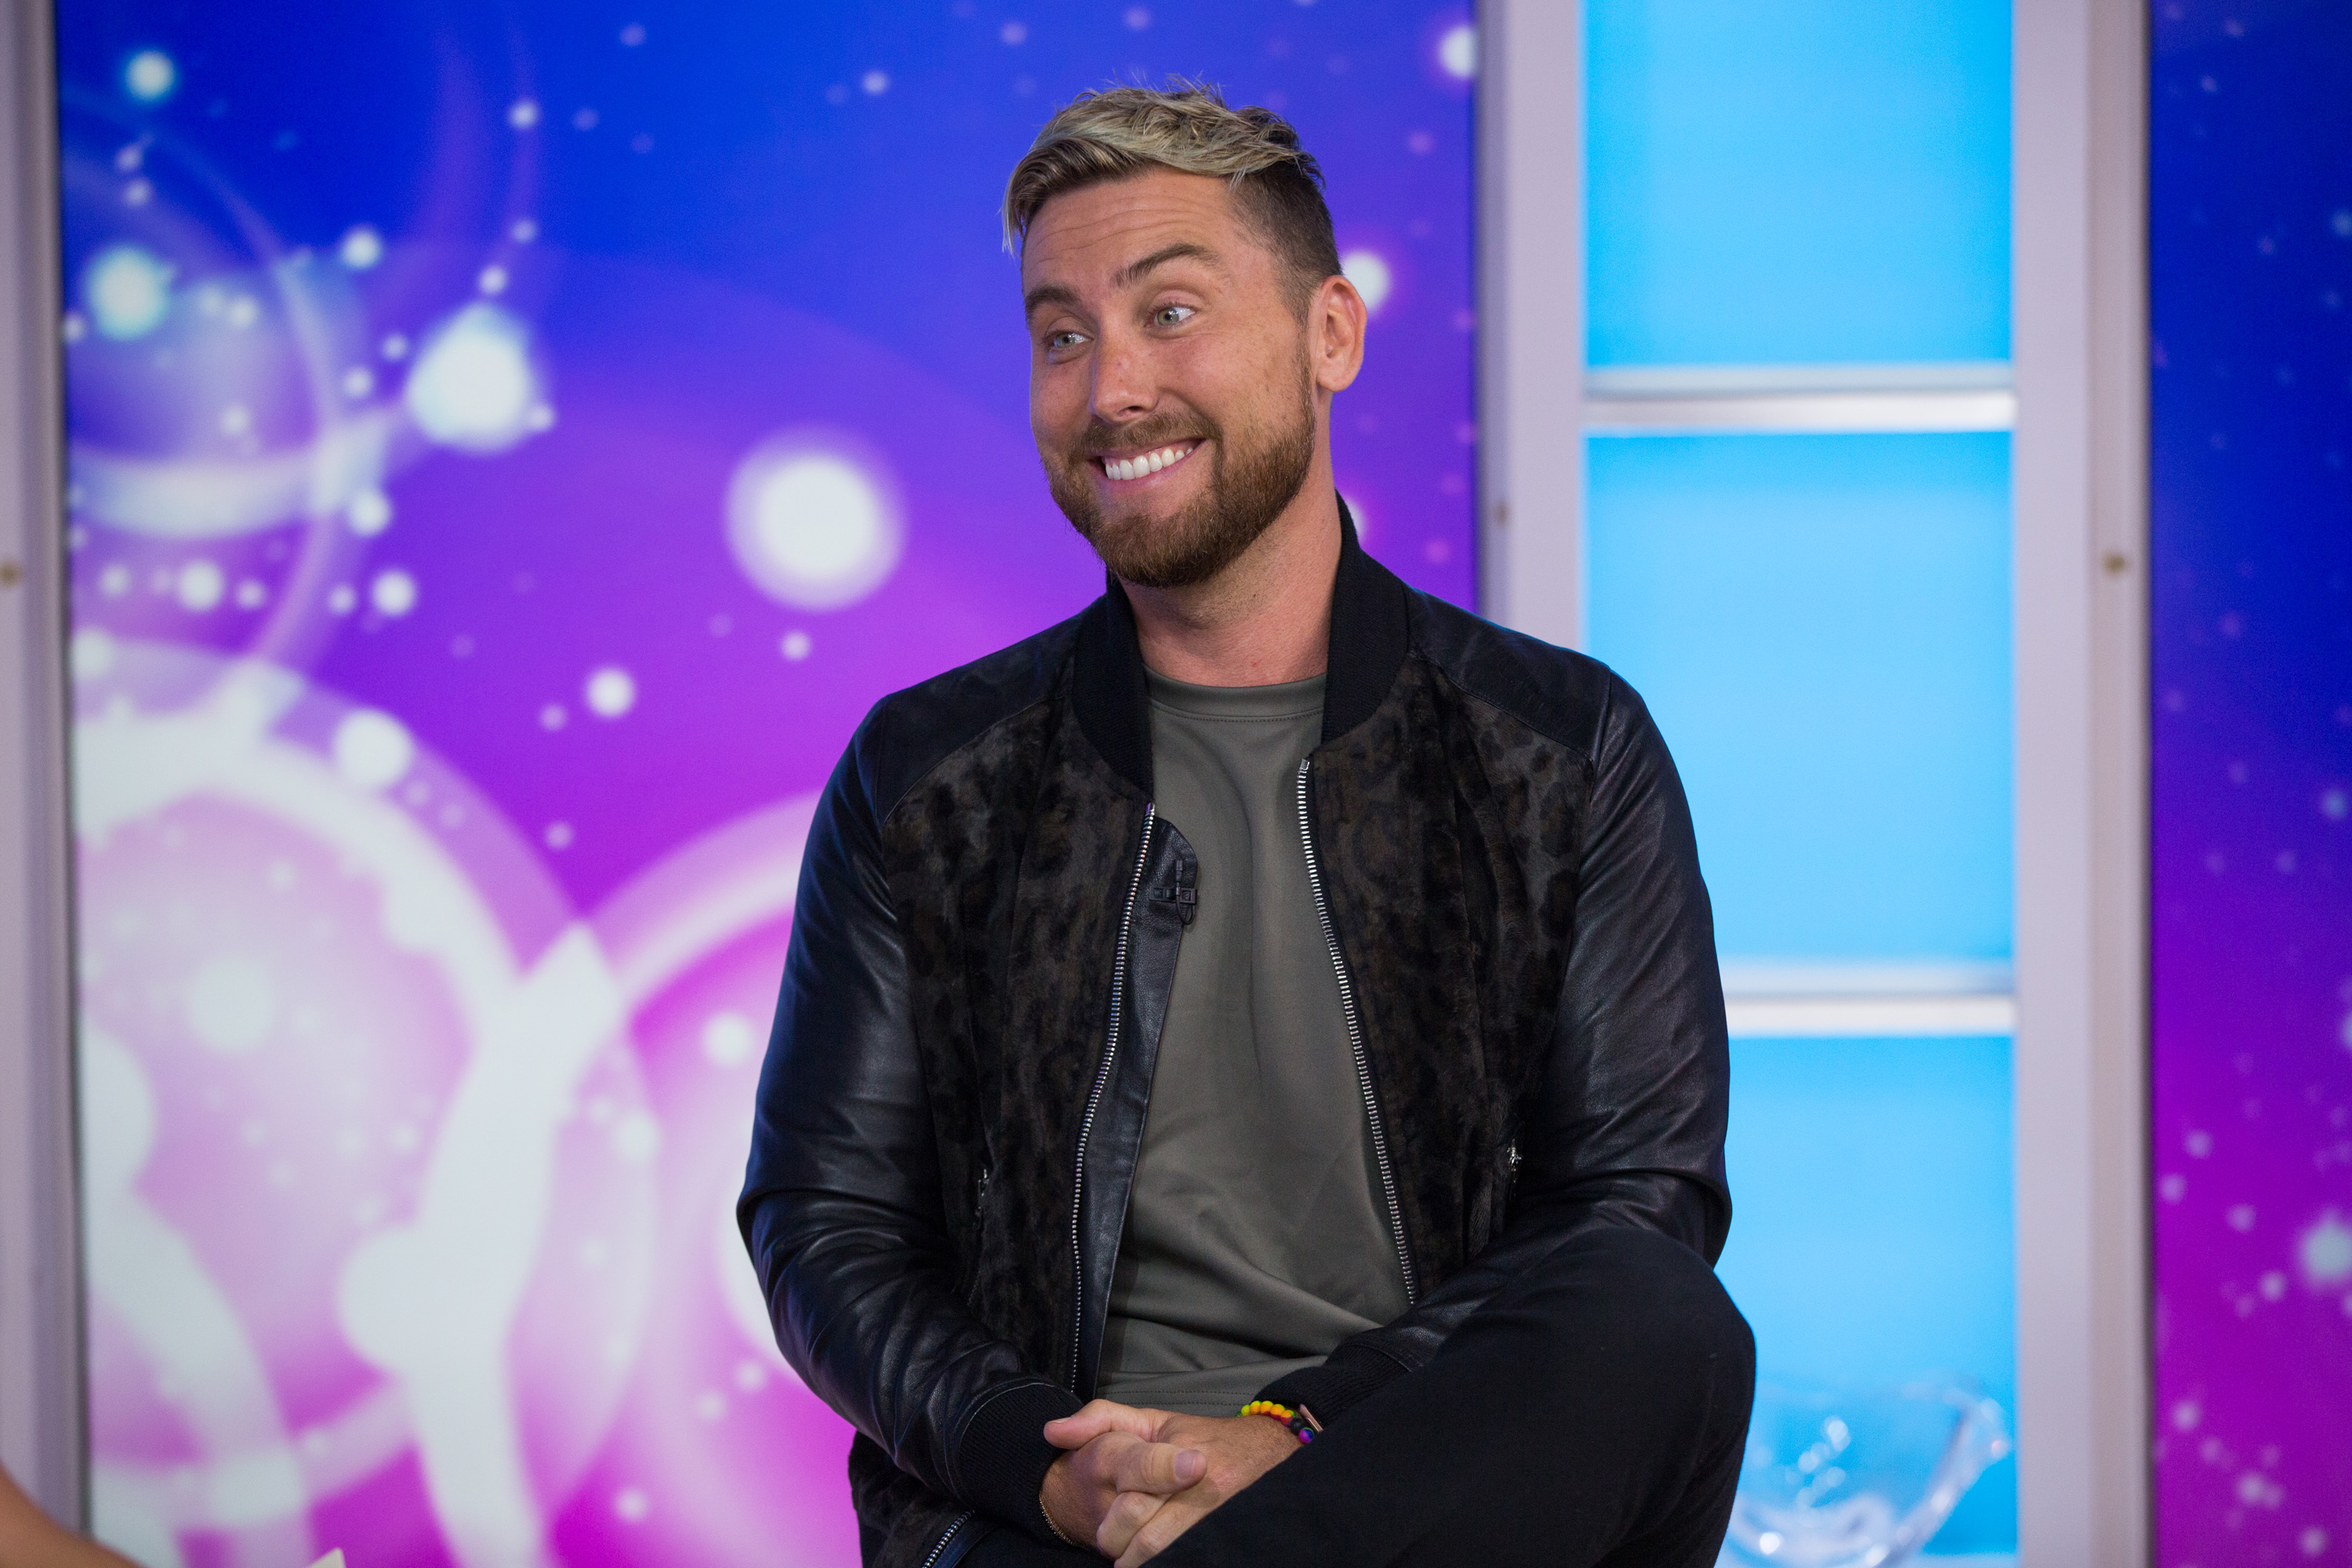 Lance Bass' Bidding War With HGTV Over The Brady Bunch House Was a Real Saga. Here's What Happened